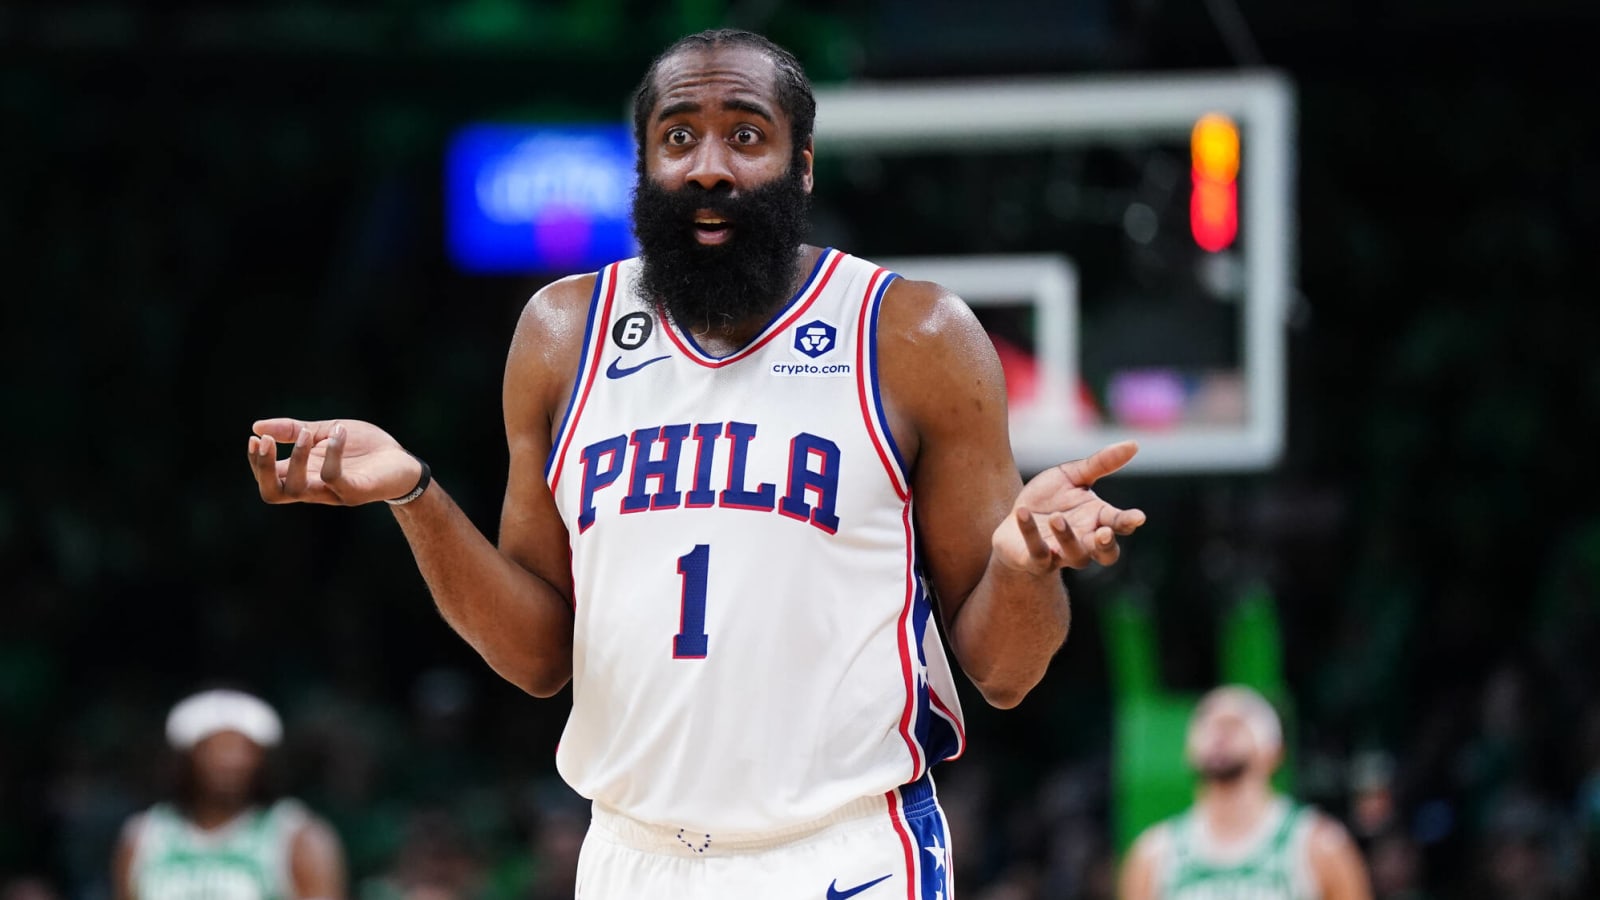 Rival coach shades James Harden amid impasse with Sixers